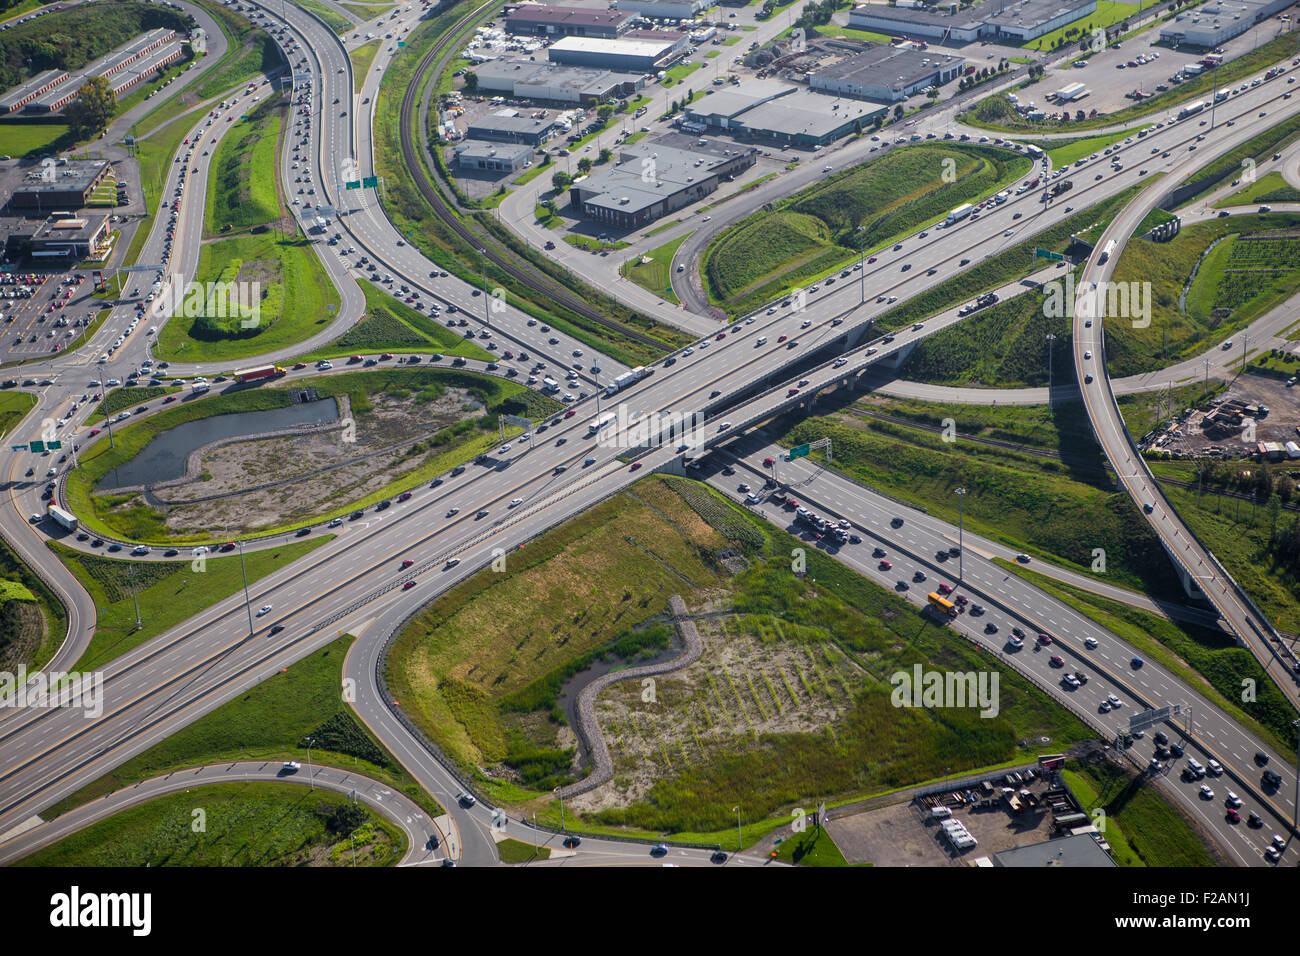 Autoroute Robert Bourassa highway and autoroute Charest highway Interchange is pictured in this aerial photo in Quebec city Stock Photo